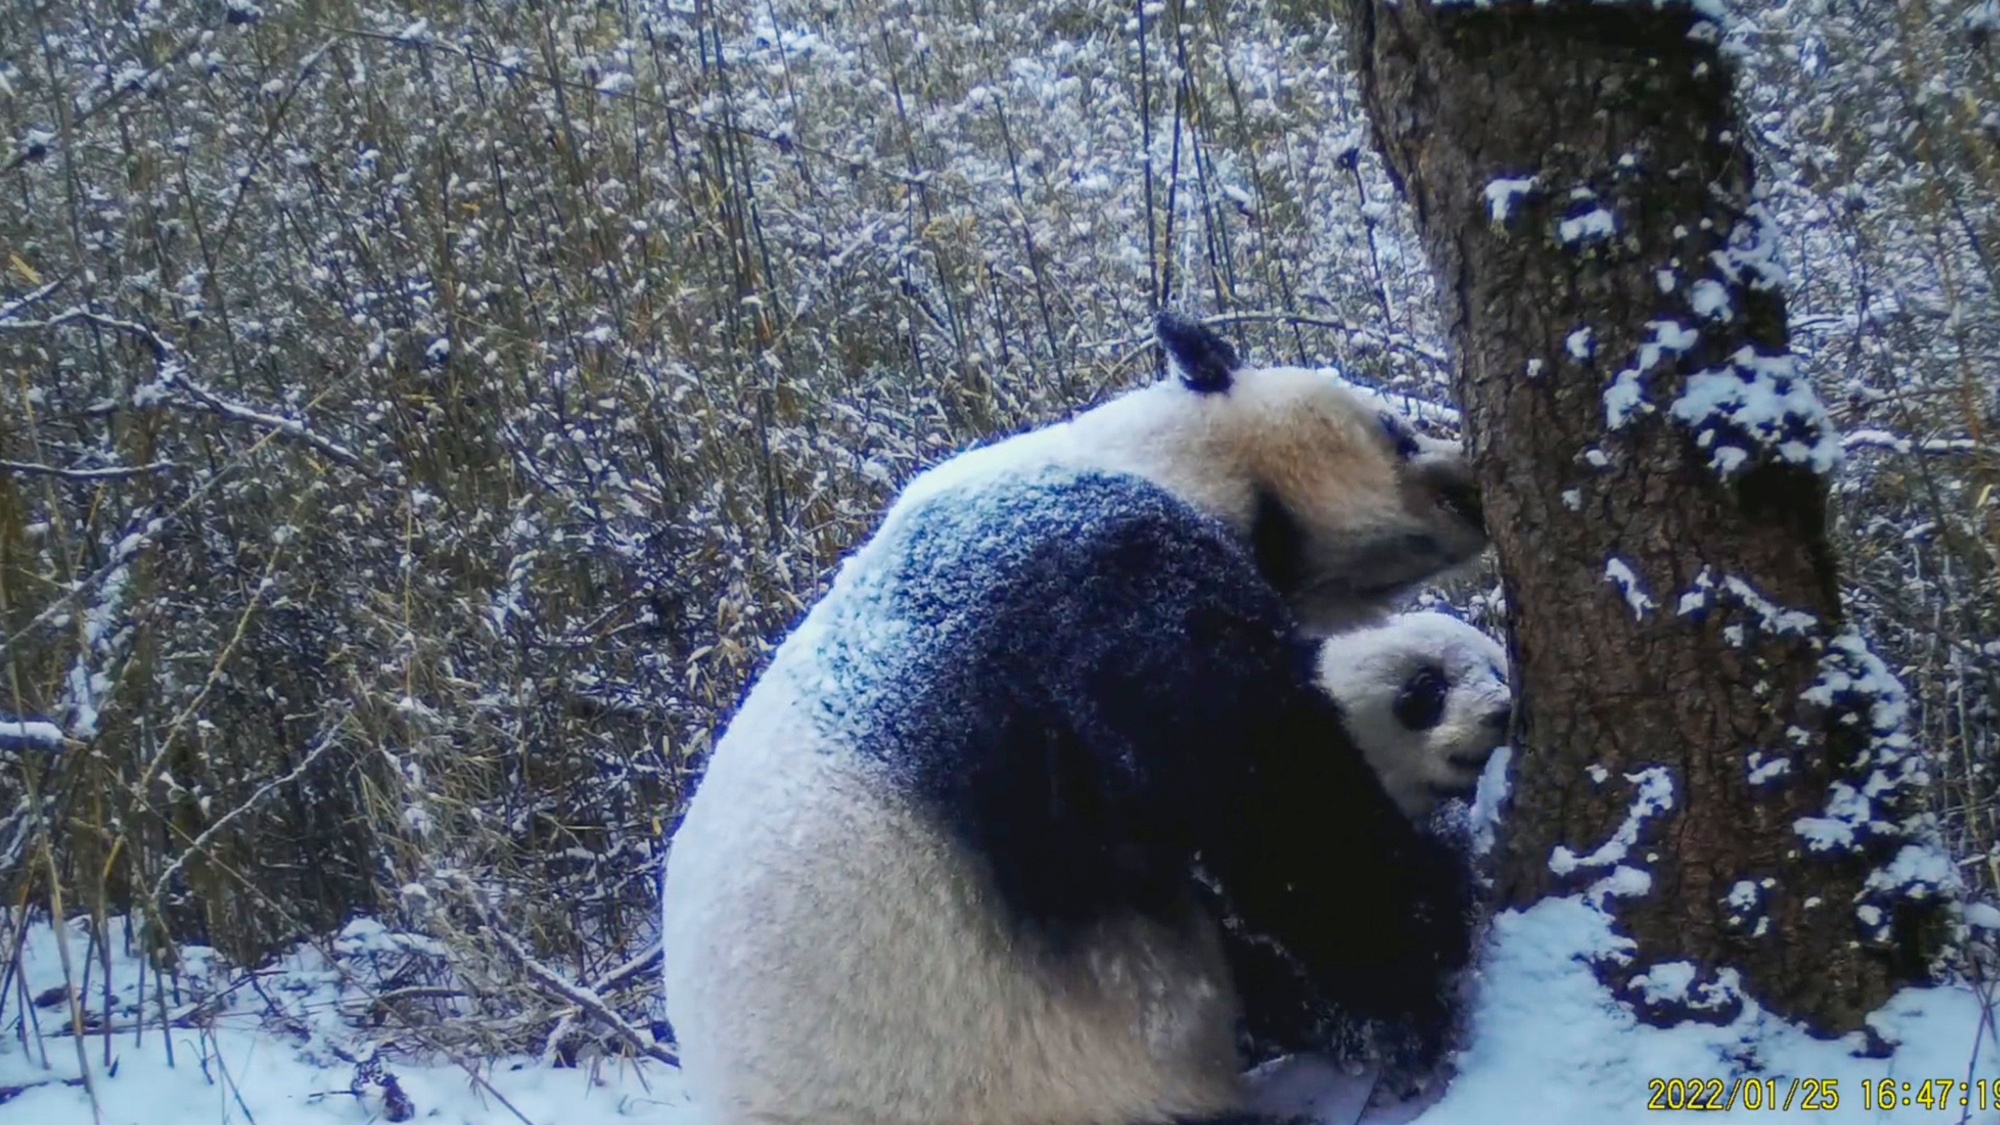 Read more about the article SNOW JOKE: Giant Panda Cub Being Taught Scent-Marking Skills In Winter